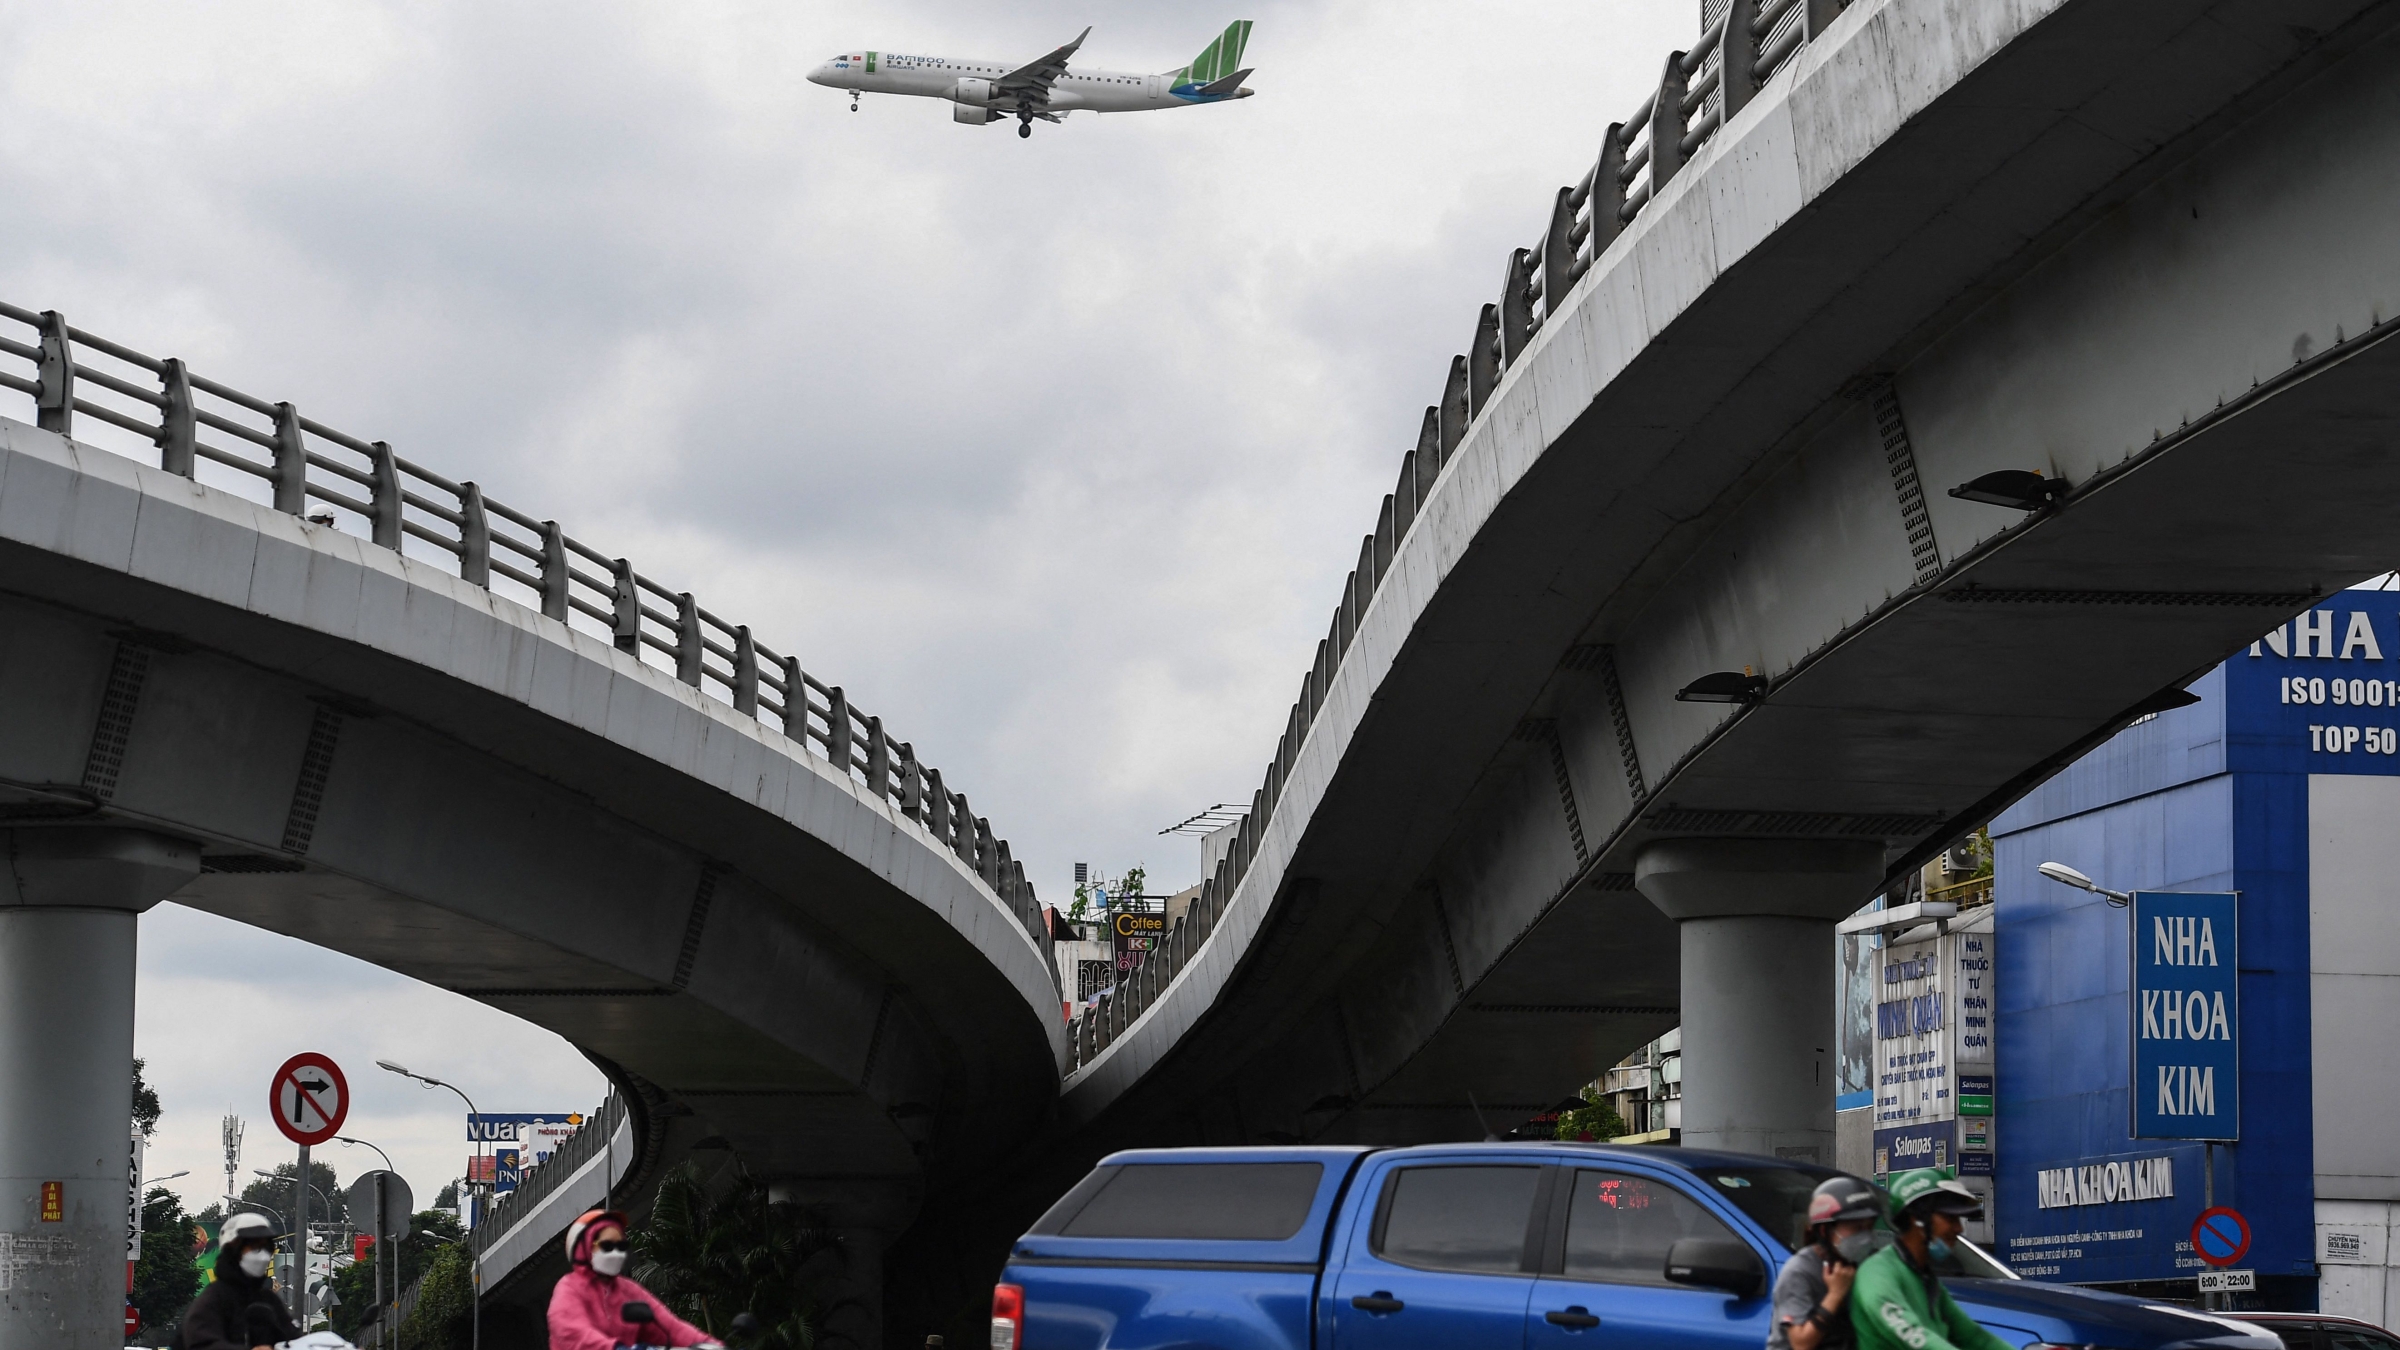 An airplane flies over commuters on a street in Ho Chi Minh City on September 22, 2022. Tan Son Nhat International Airport has been operating well over capacity for years, but efforts to build a third terminal have been slowed due, in part, to what analysts say are unintended consequences of an anti-corruption crackdown.聽